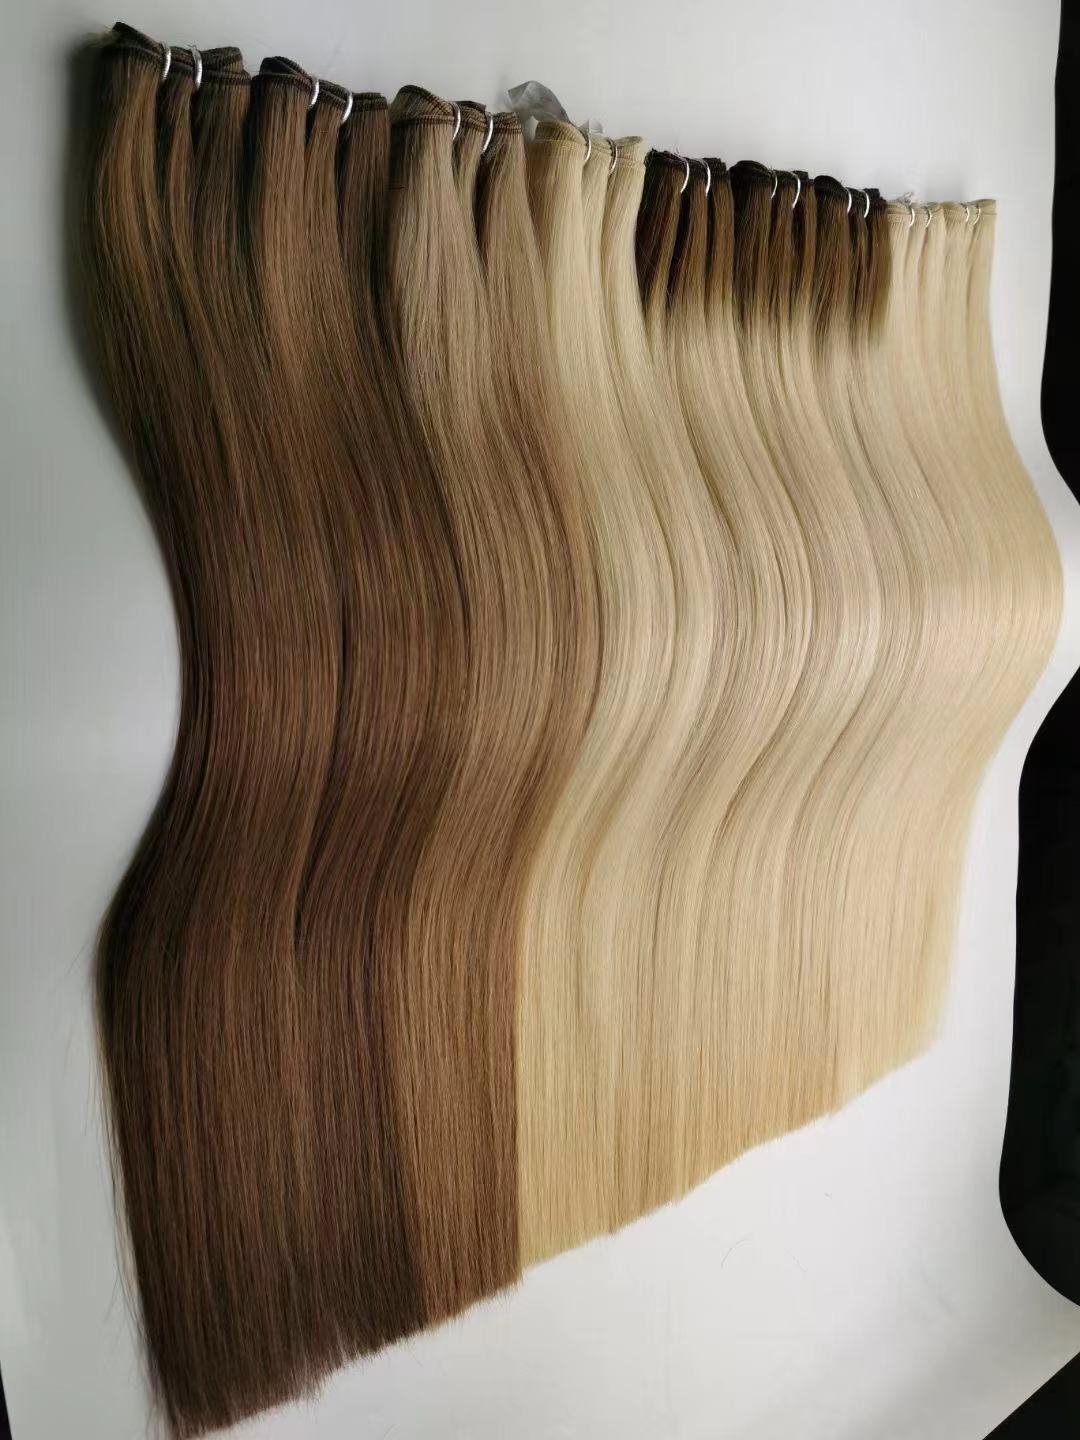 China remy hair weft hair extensions factory QM263